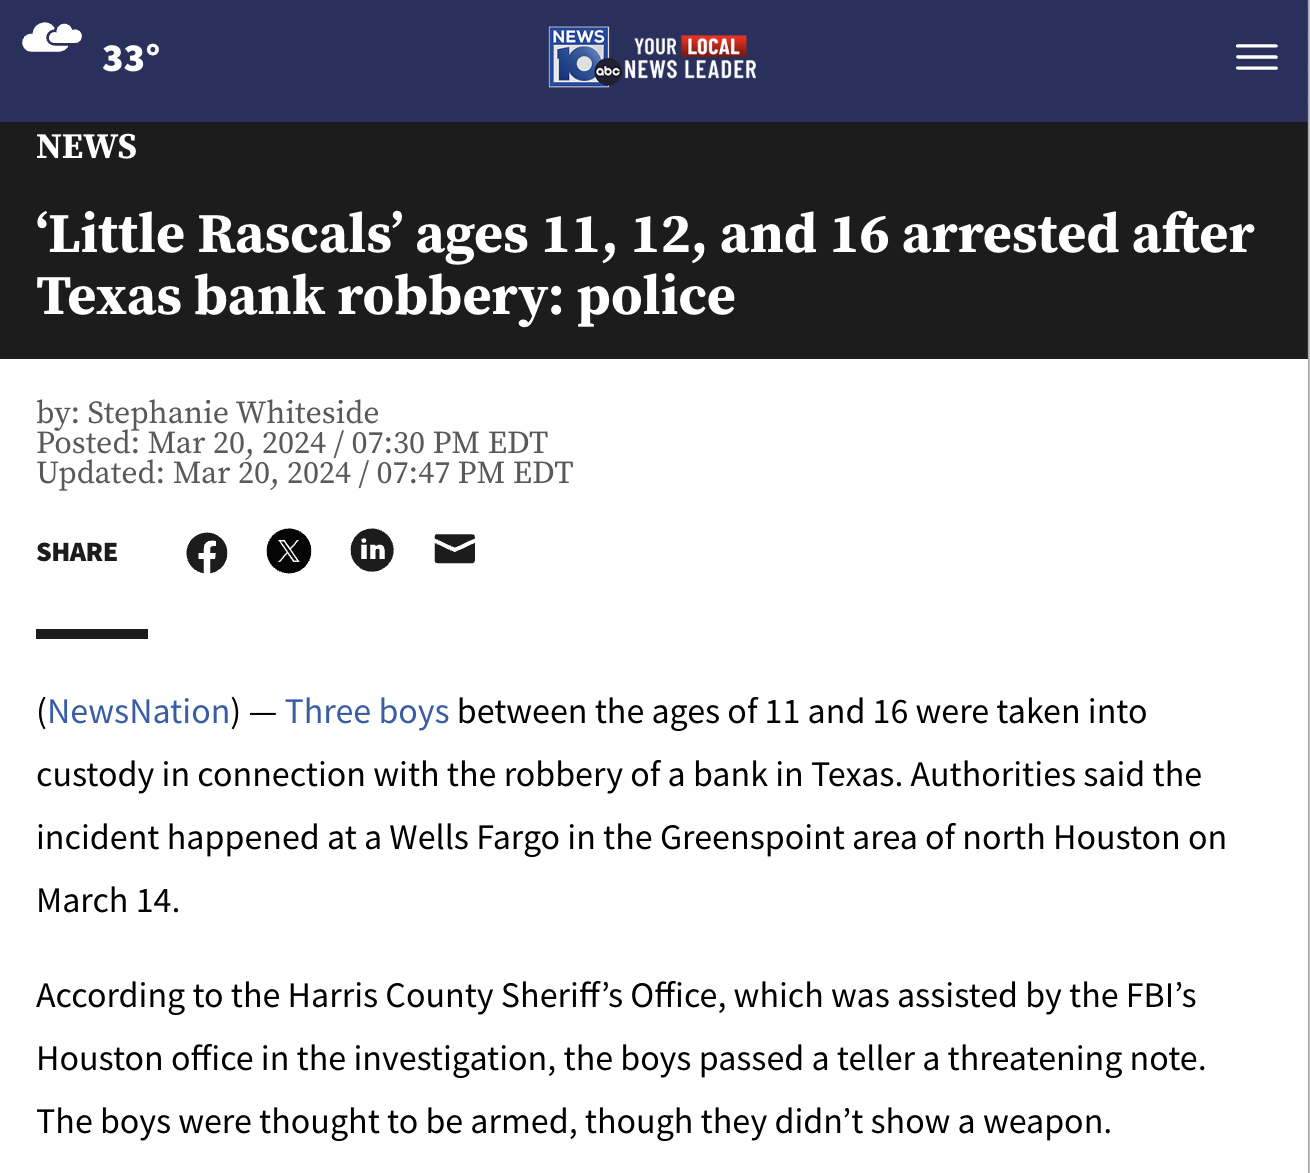 screenshot - 33 News News Your Local abc News Leader 10%b0 ||| 'Little Rascals' ages 11, 12, and 16 arrested after Texas bank robbery police by Stephanie Whiteside Posted Edt Updated Edt F in NewsNation Three boys between the ages of 11 and 16 were taken 